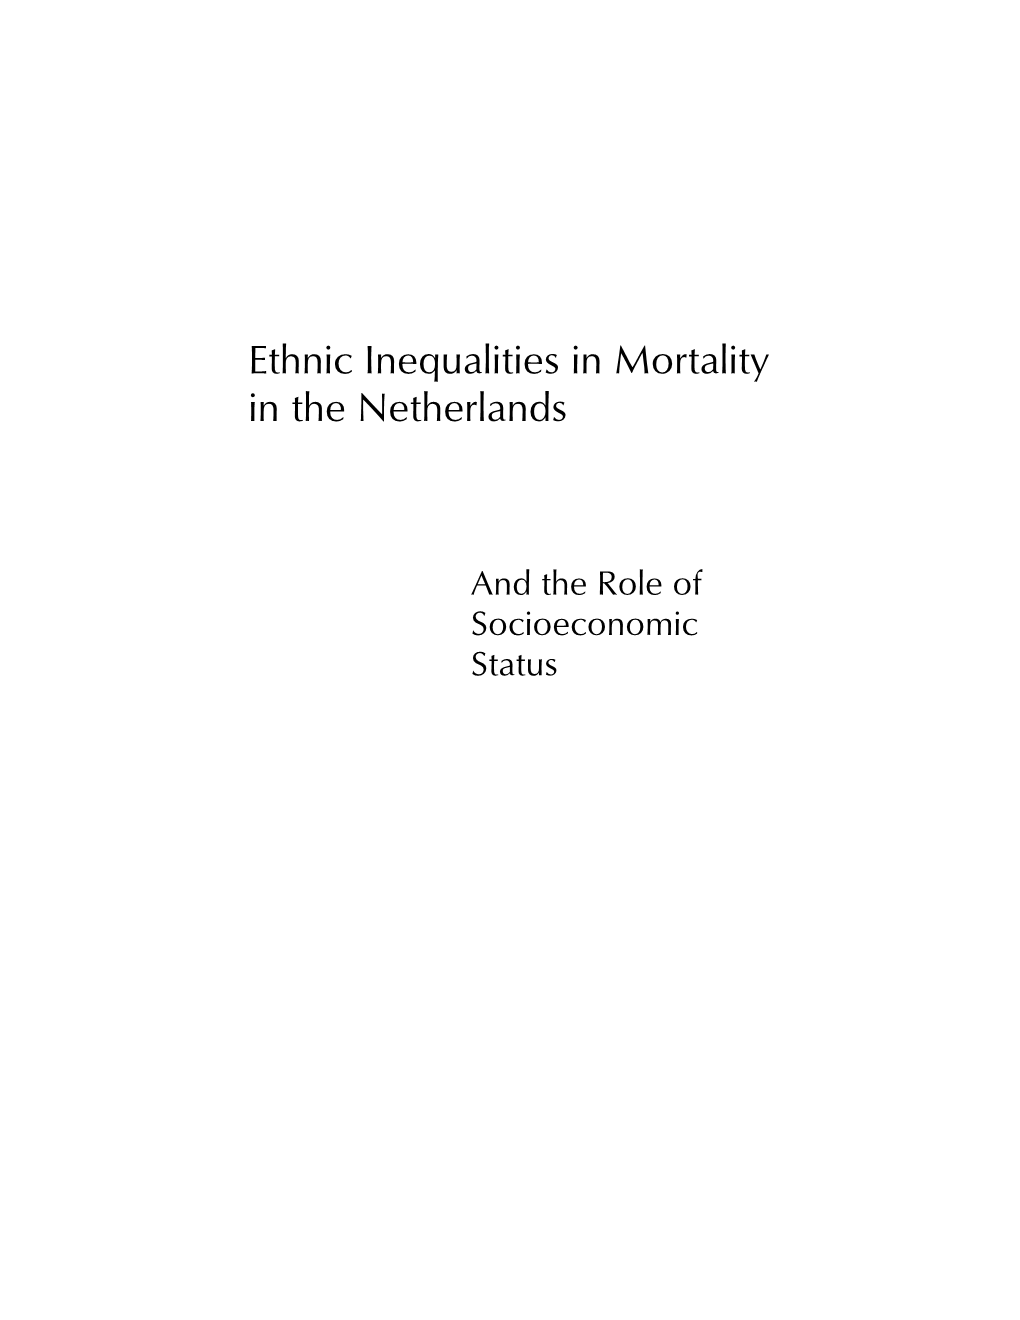 Ethnic Inequalities in Mortality in the Netherlands